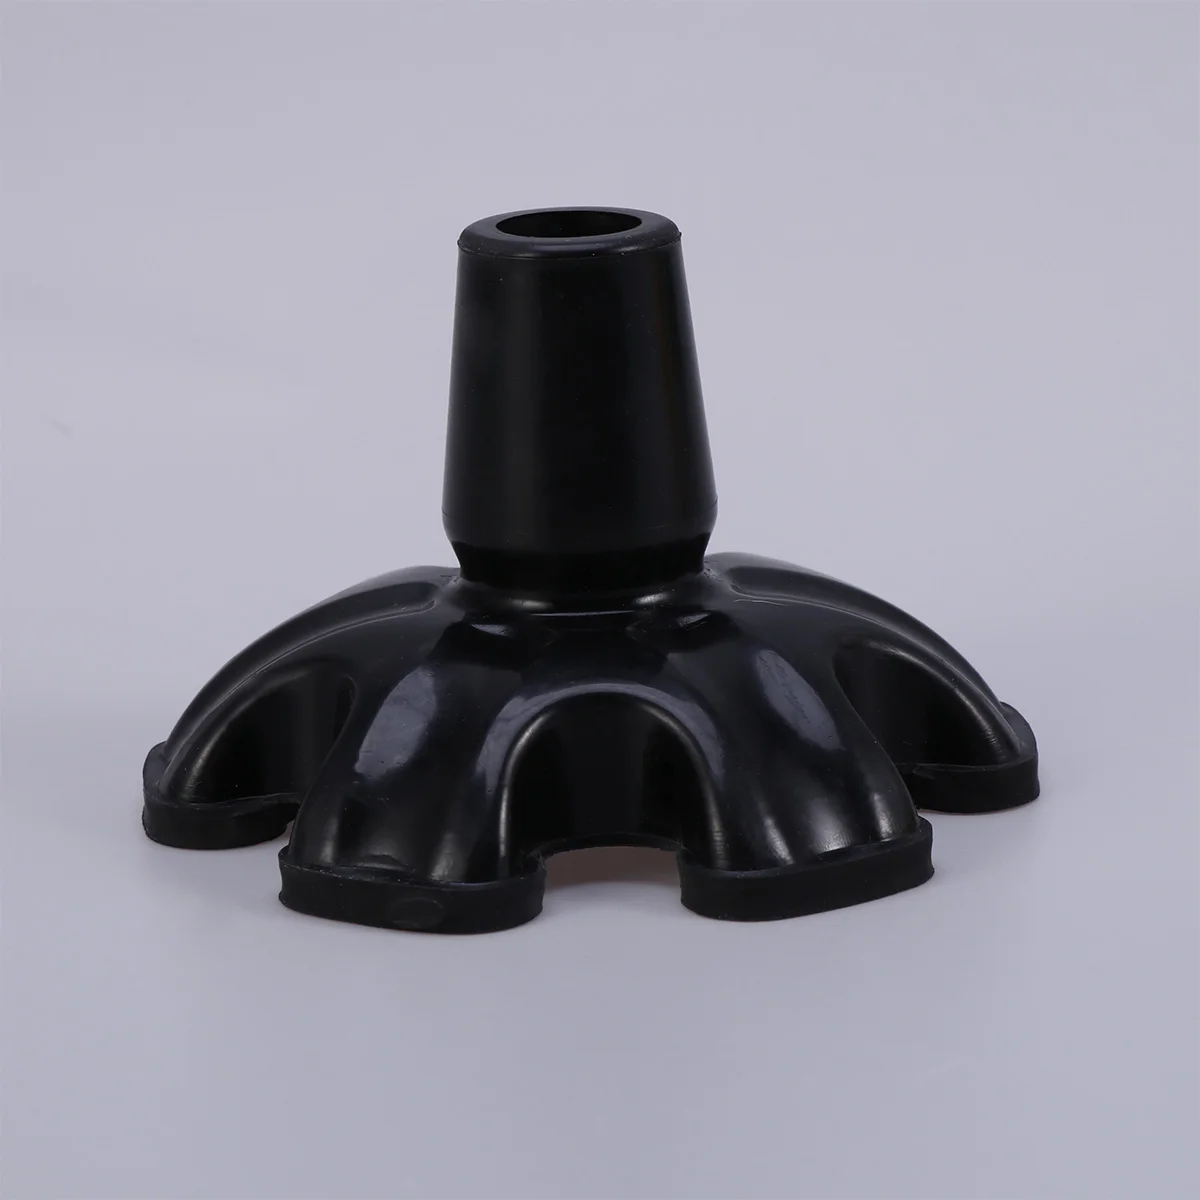 19 Mm Decked Accessories Rubber Tips Canes Walking Stick Rubber Feet Cane Foot Decorative Cane Tips Cane Replacement Foot Pad